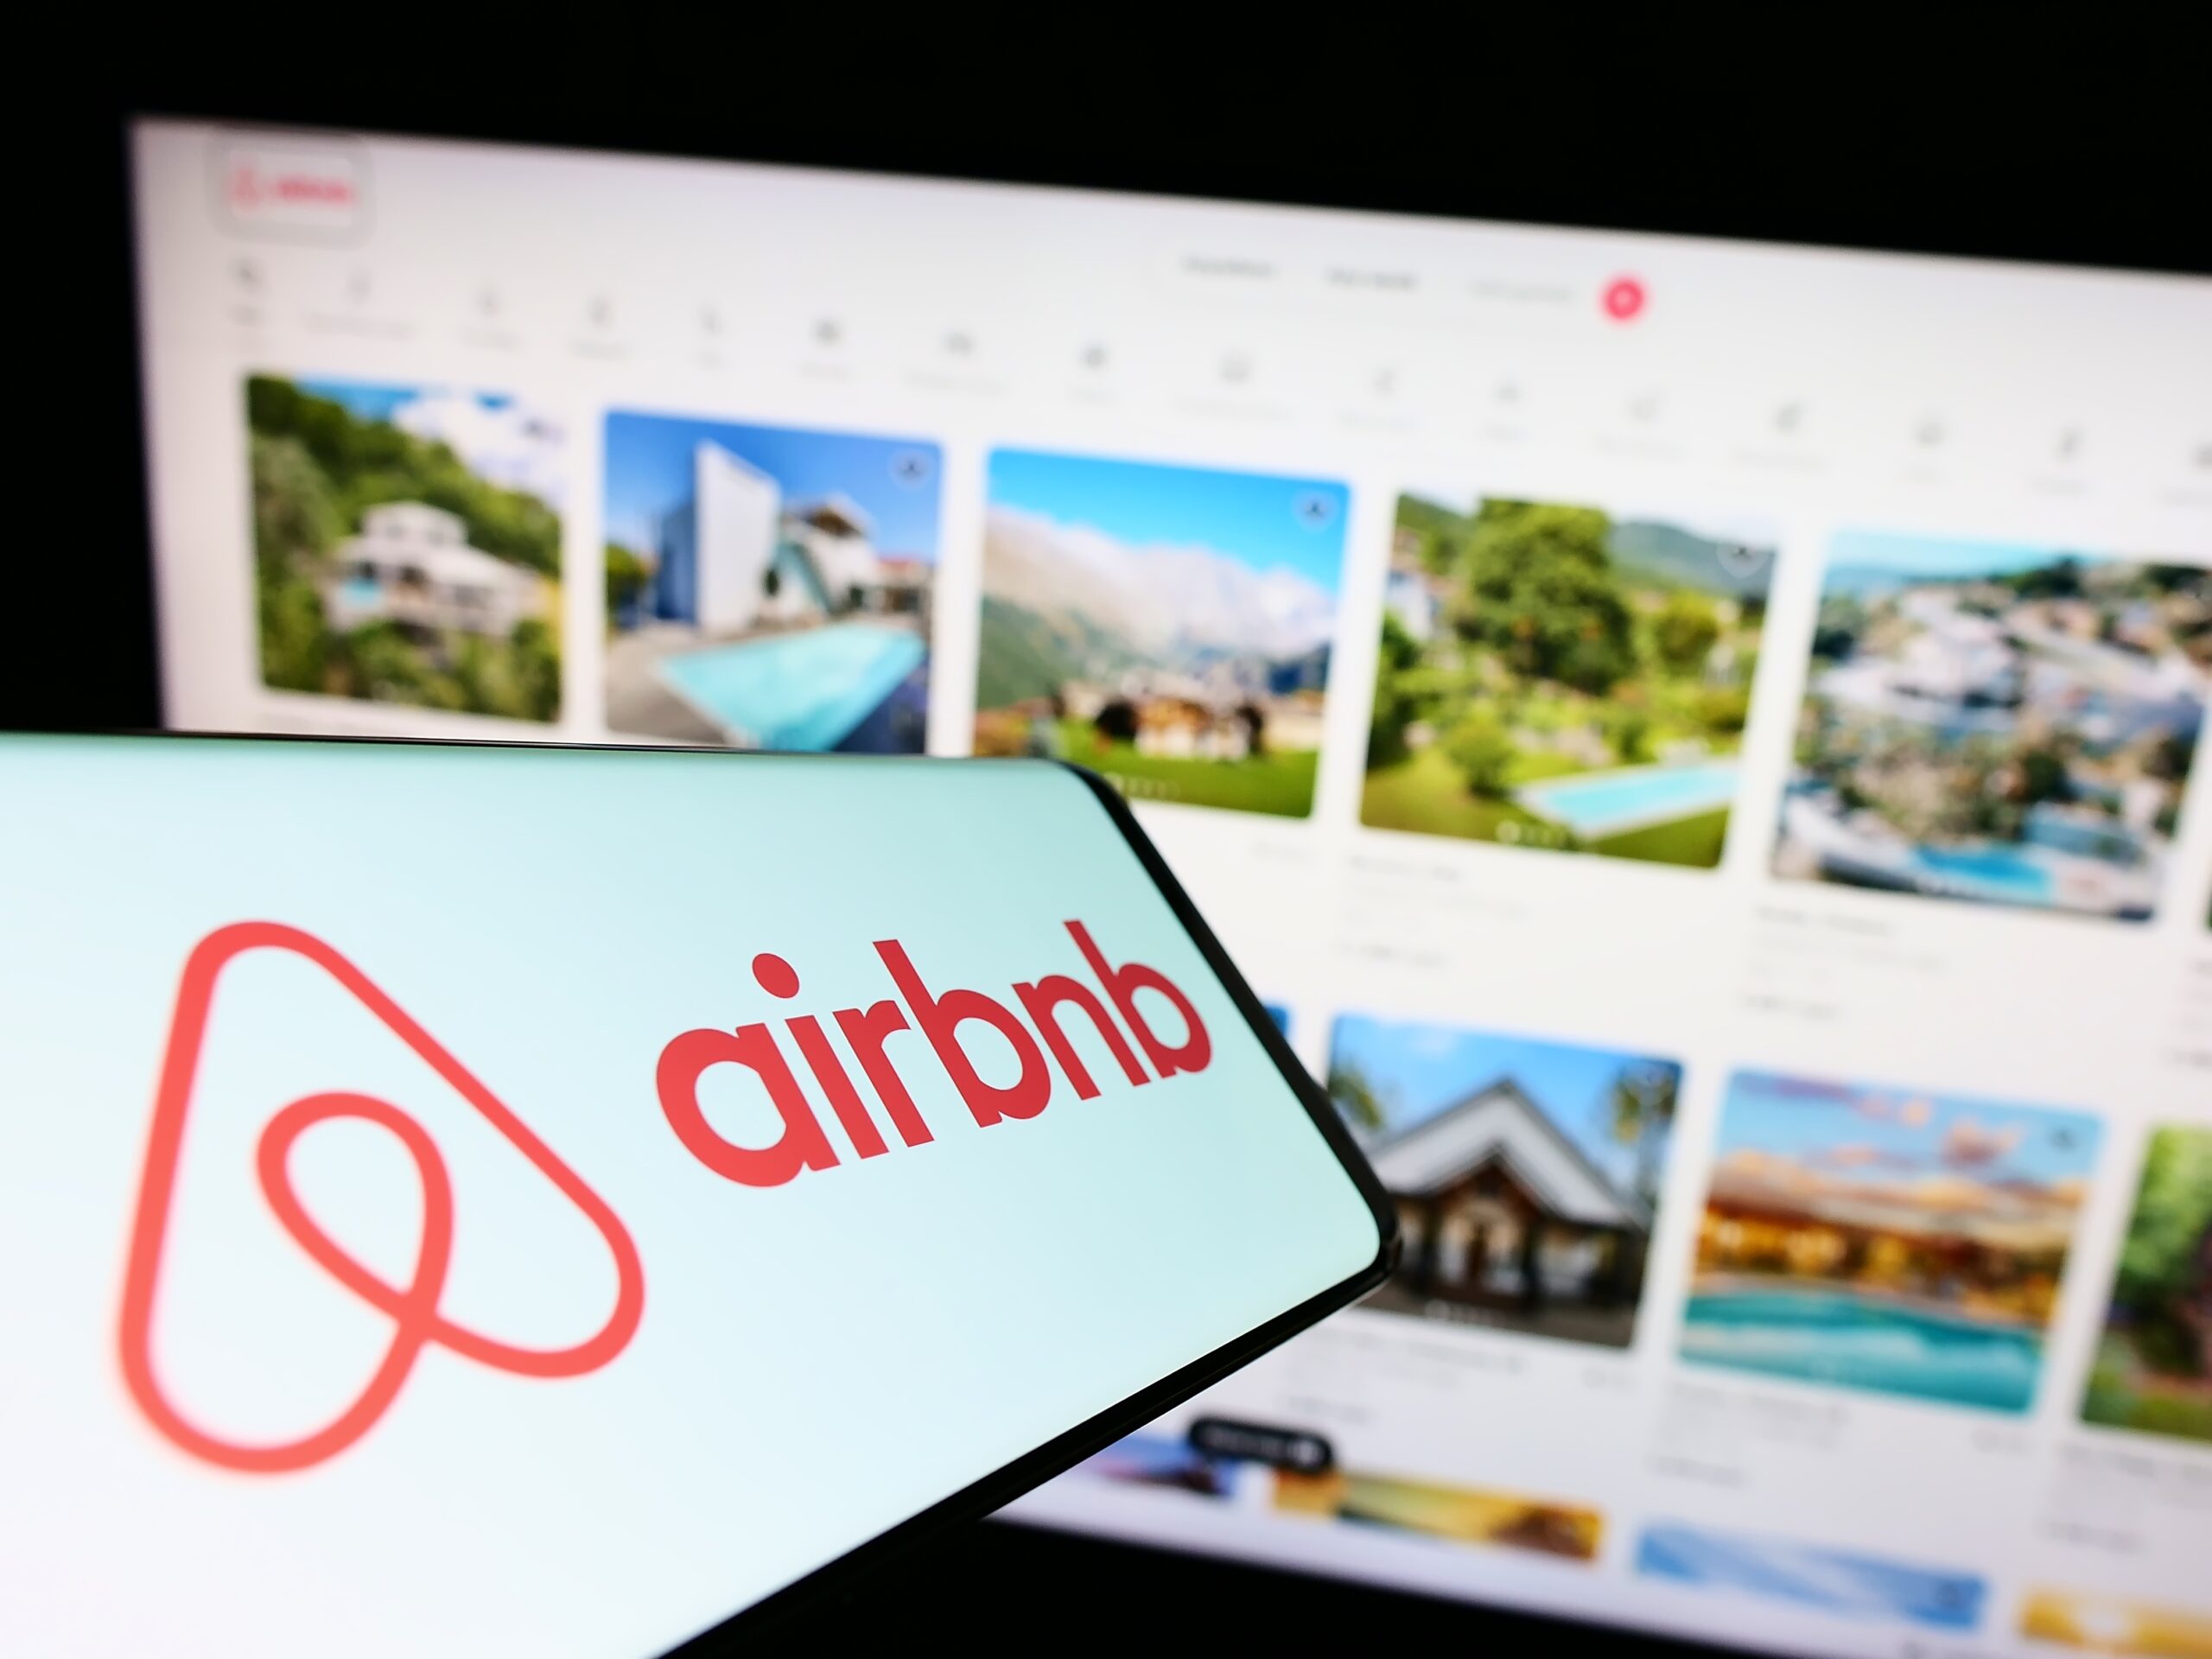 he-became-a-millionaire-at-26-thanks-to-airbnb-and-gave-three-tips-to-save-money-and-live-well